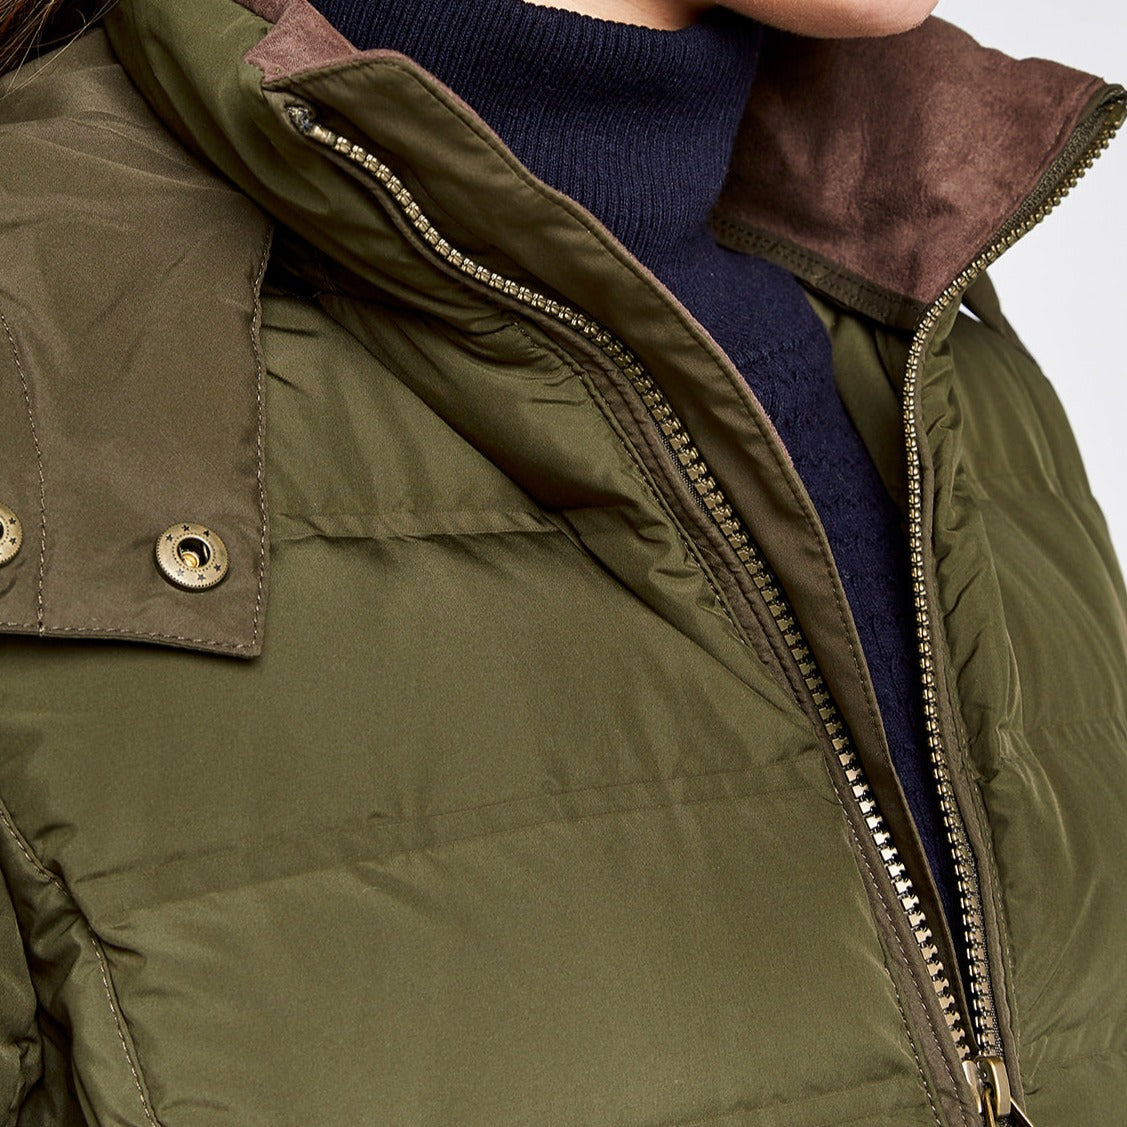 Dubarry Womens Ballybrophy Quilted Jacket #colour_olive